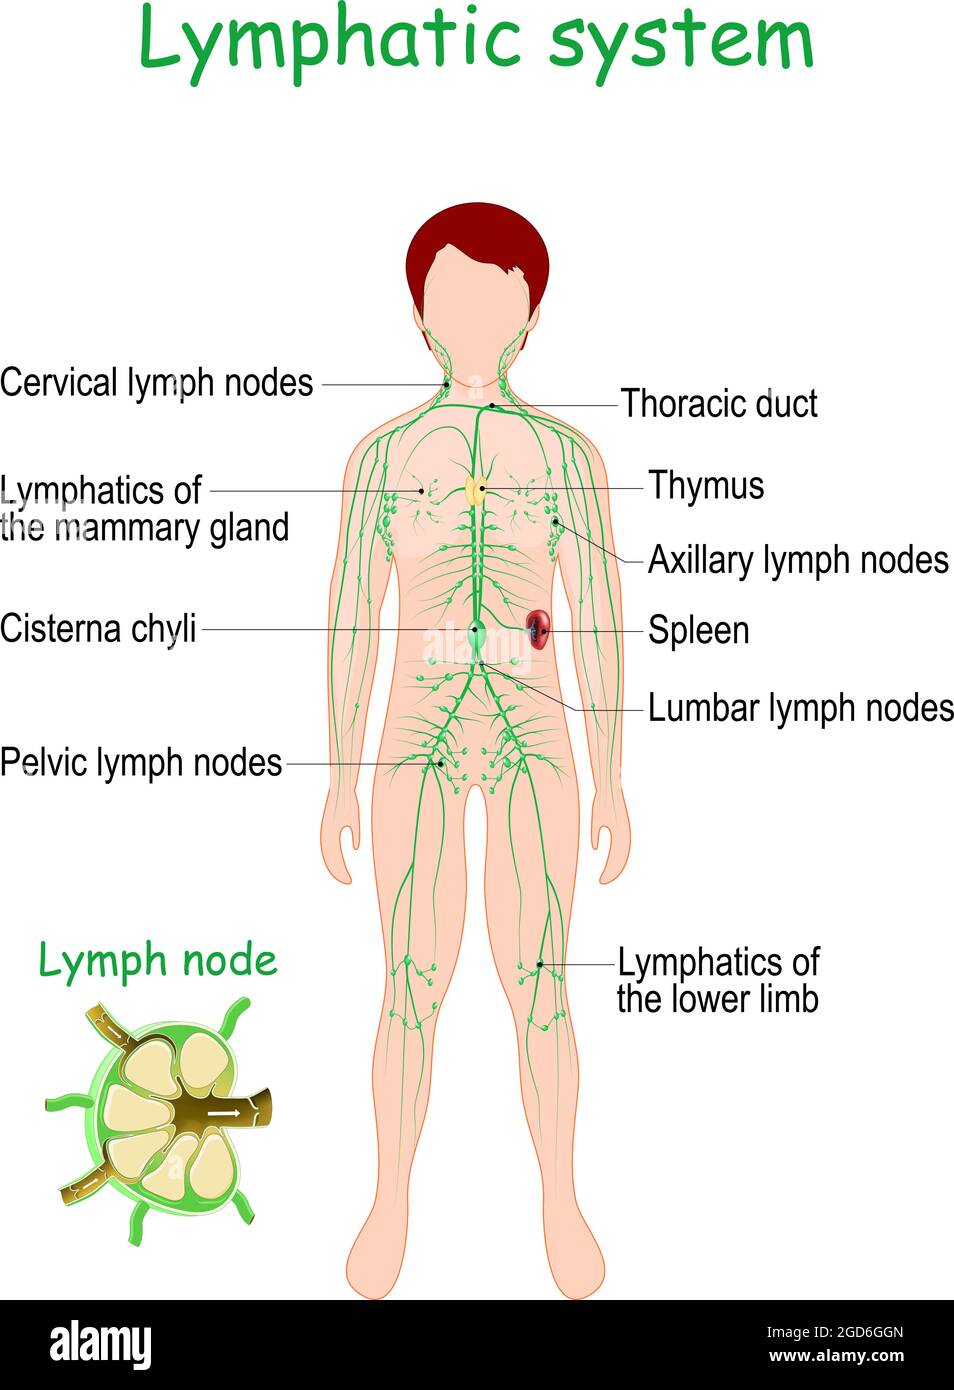 Lymphatic system. Human body with lymphoid organs (Spleen, Thymus), Lymphatic vessel, lymph nodes, and Cisterna chyli. Vector illustration Stock Vector